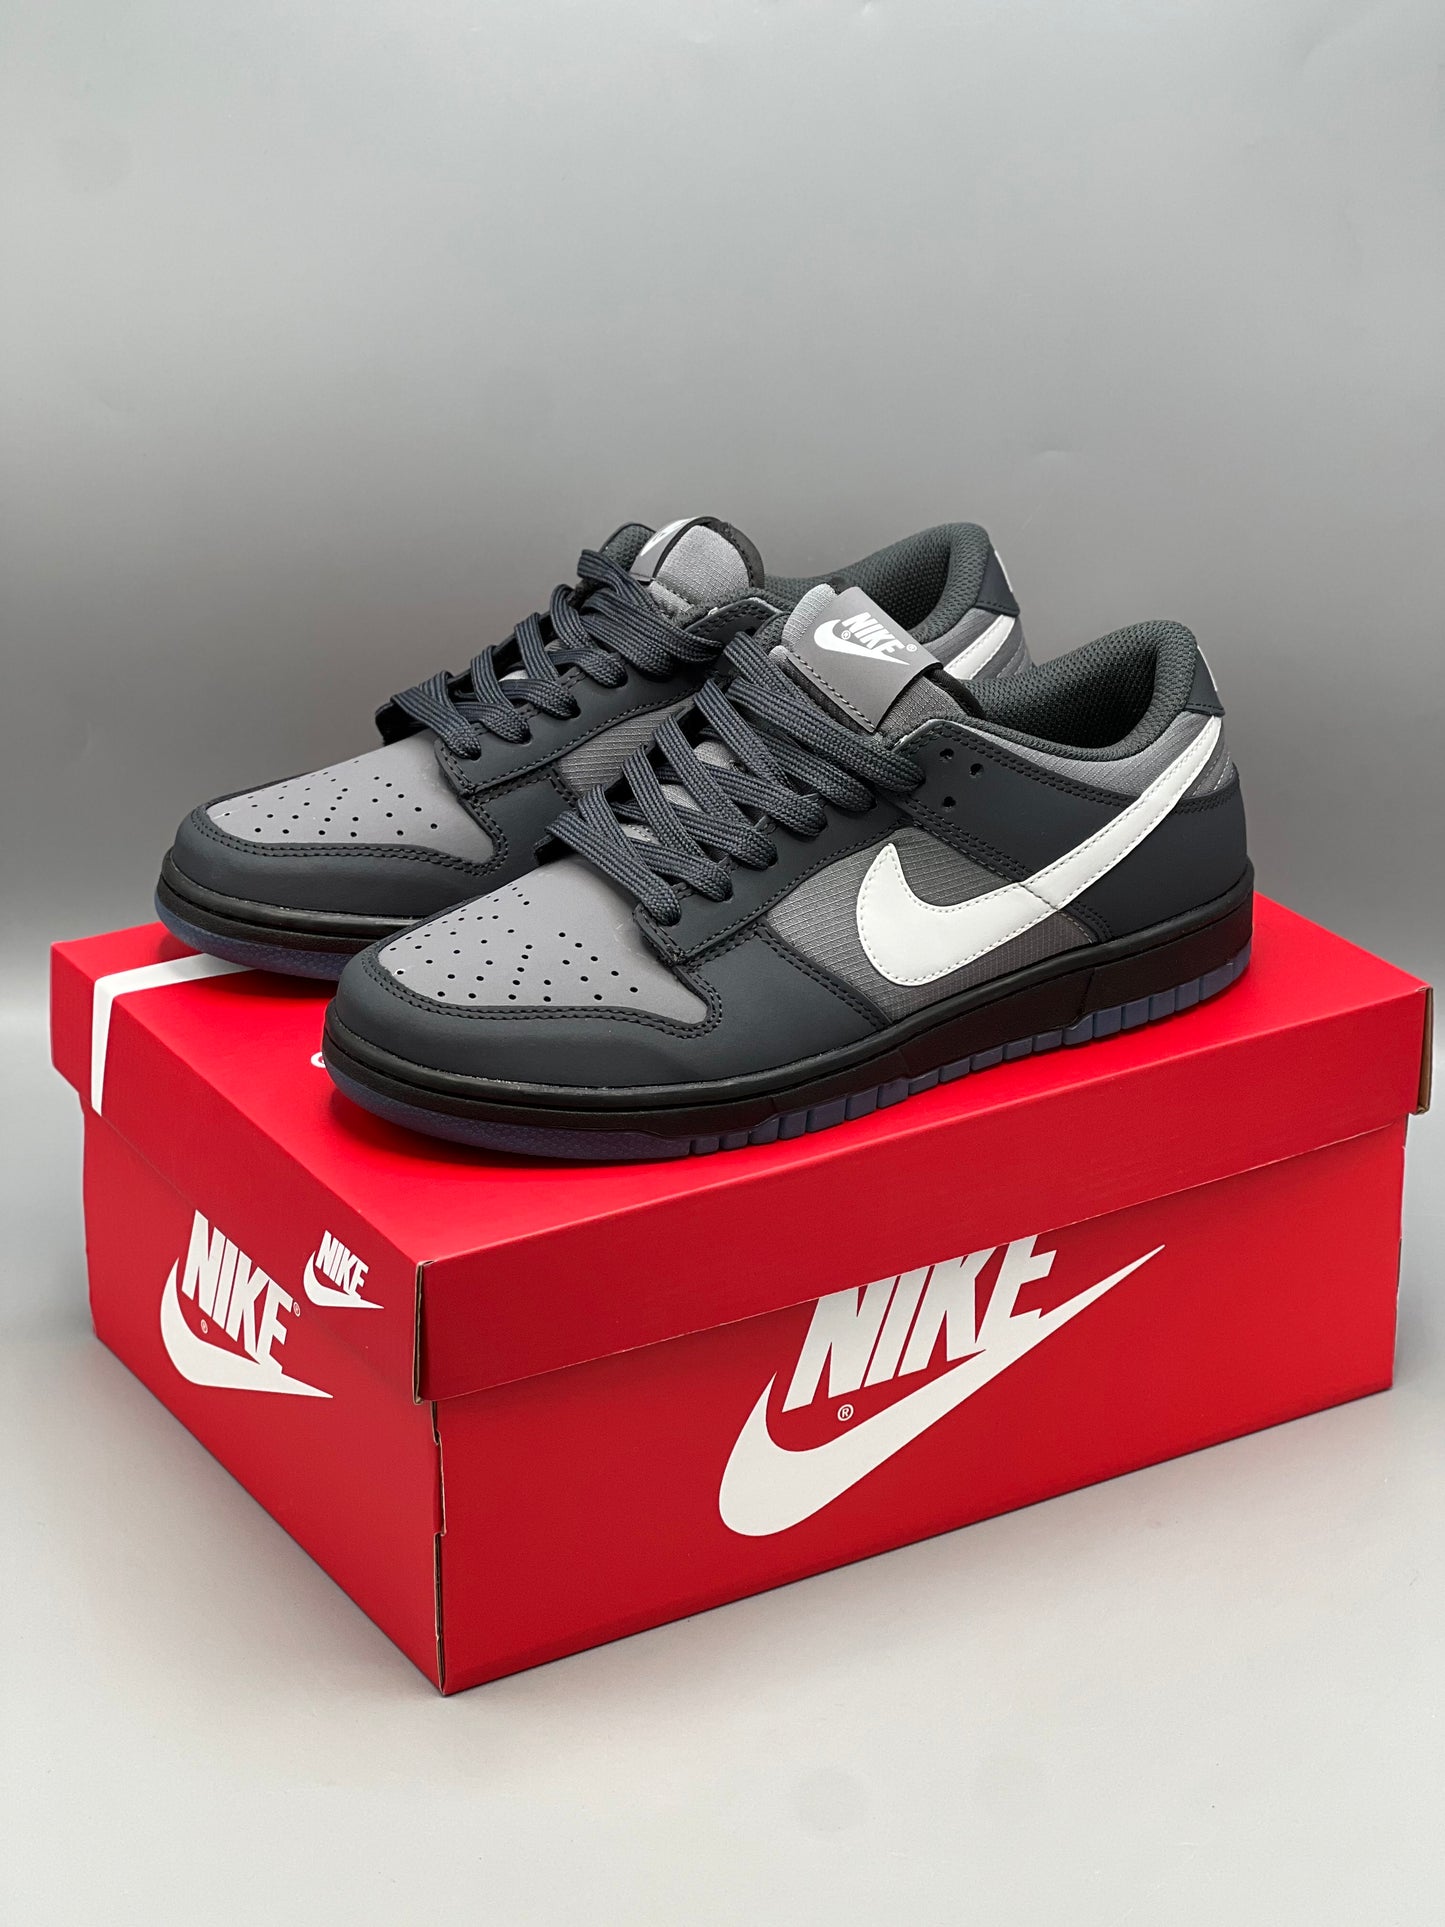 Nike dunk low “Anthracite”